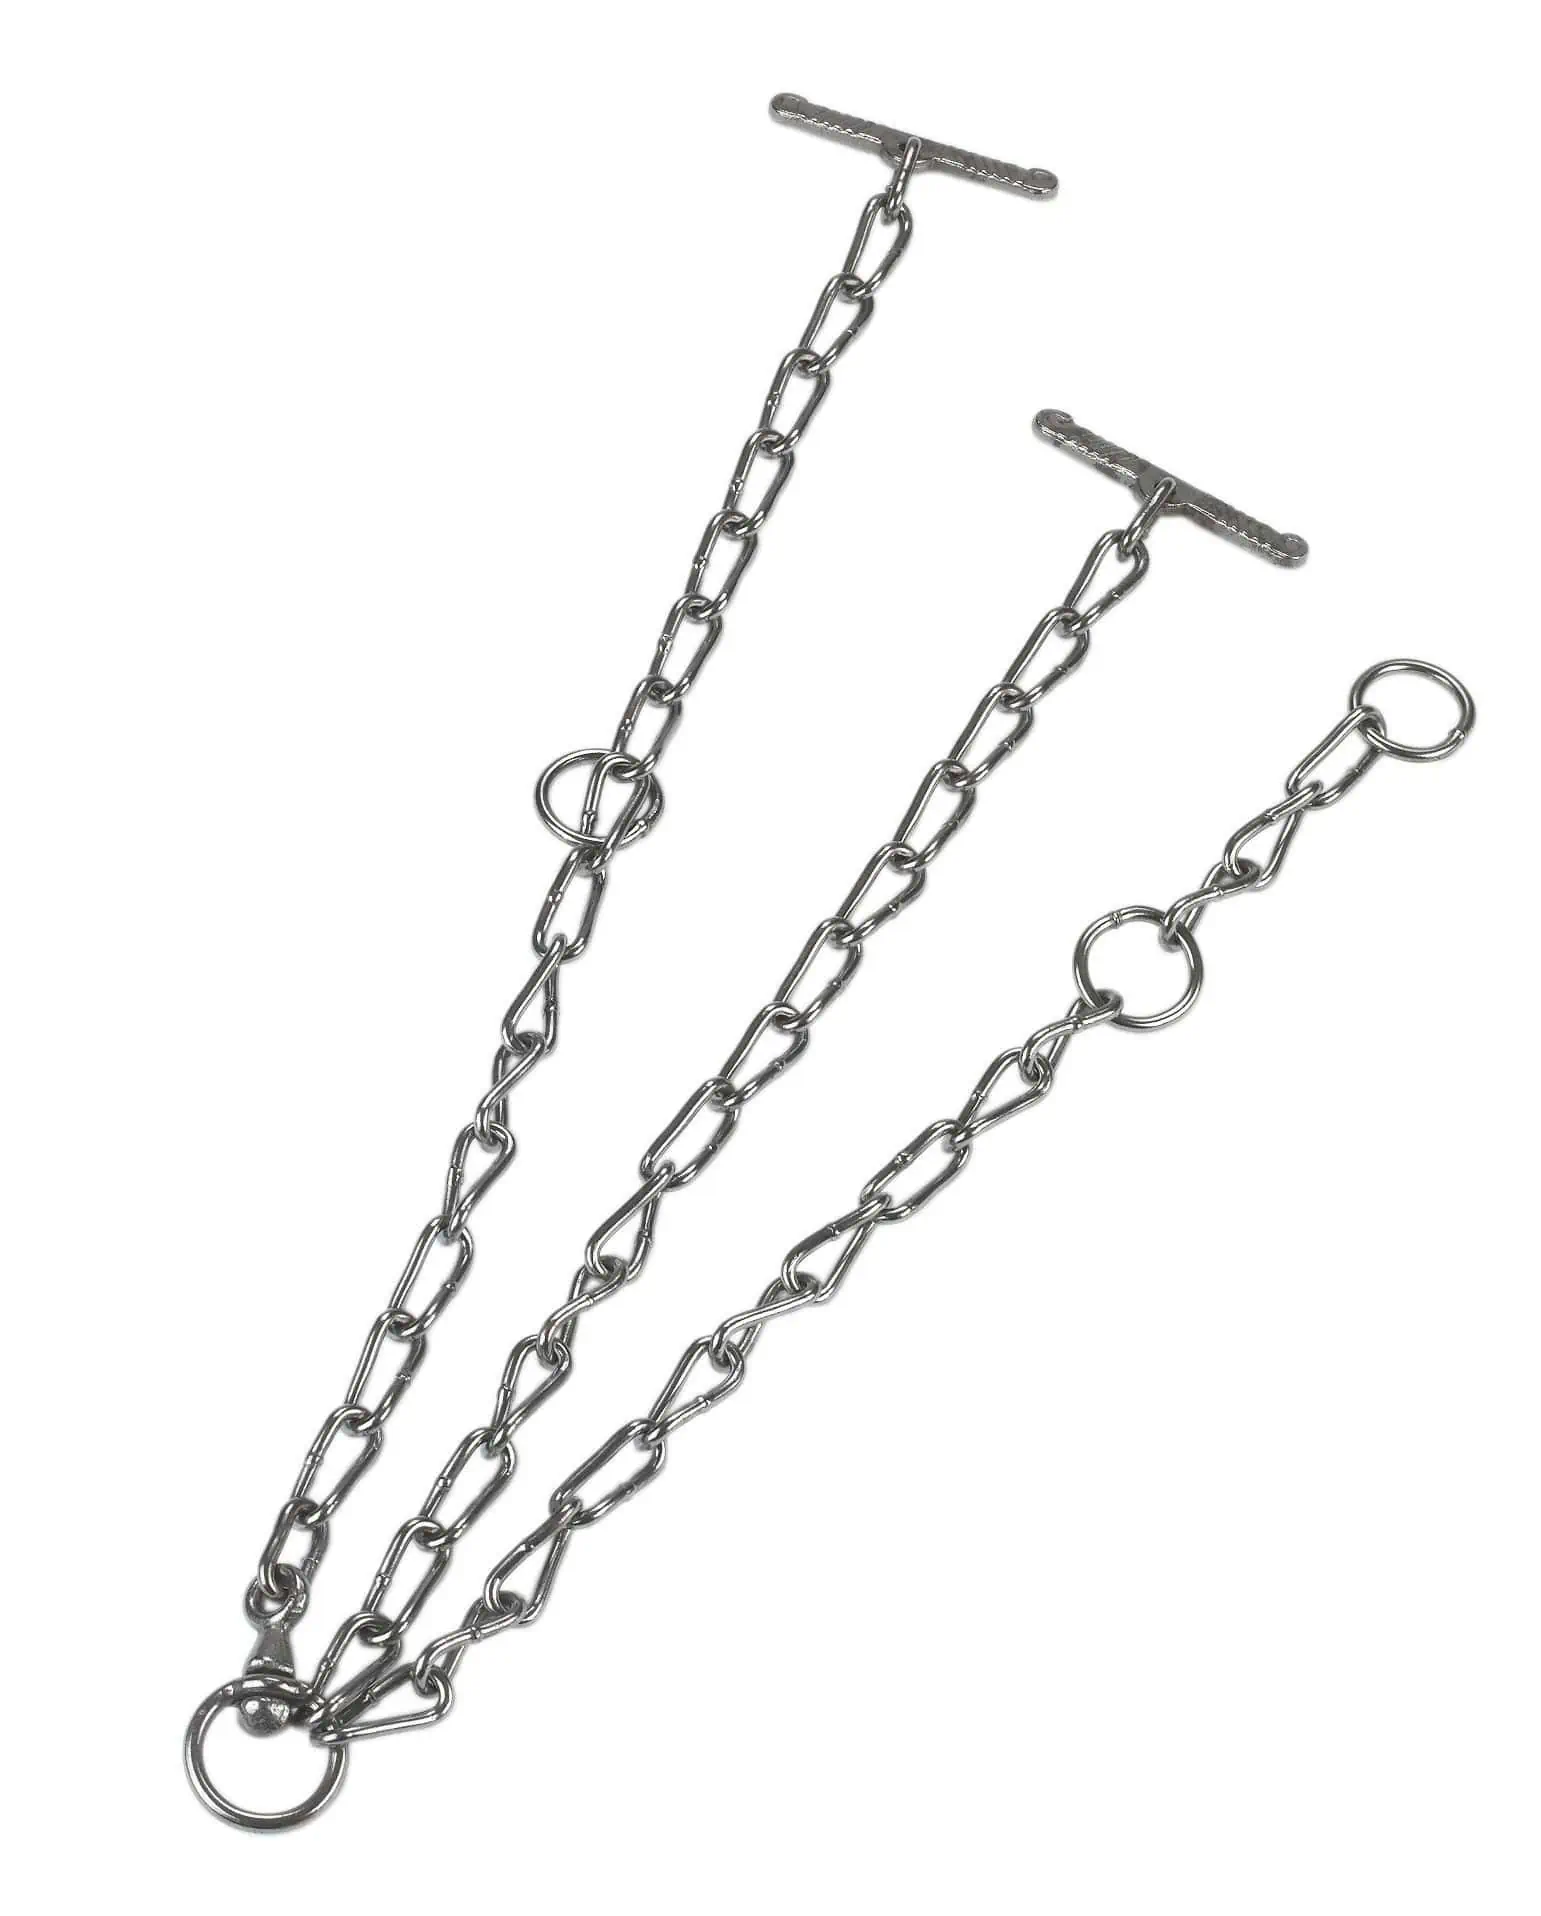 Cow chain, single lengthened galv., 60cm, 5mm